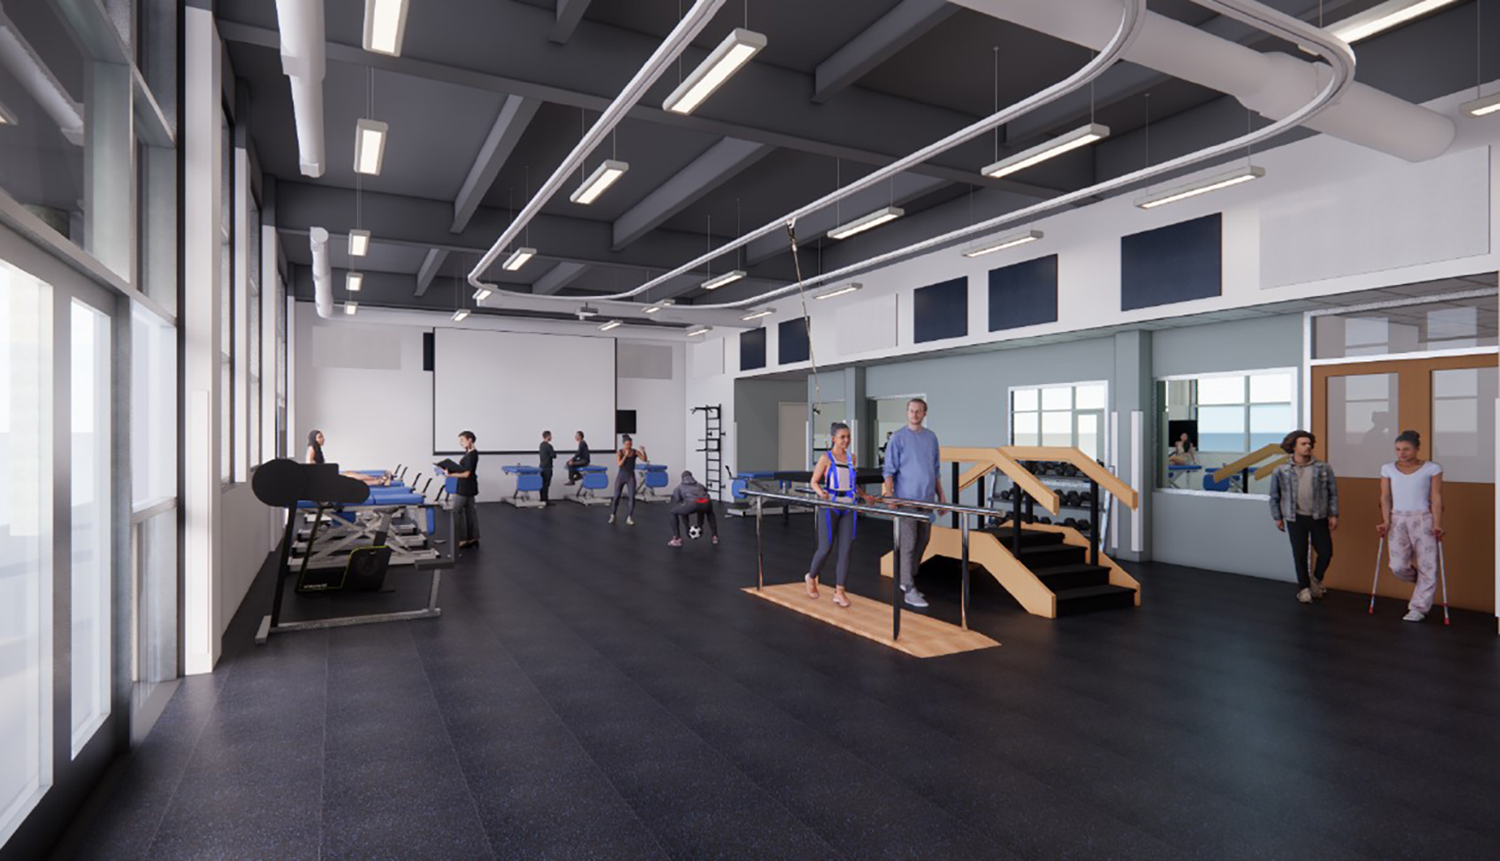 Renovation of Space for the School of Kinesiology's Doctor of Physical Therapy Program